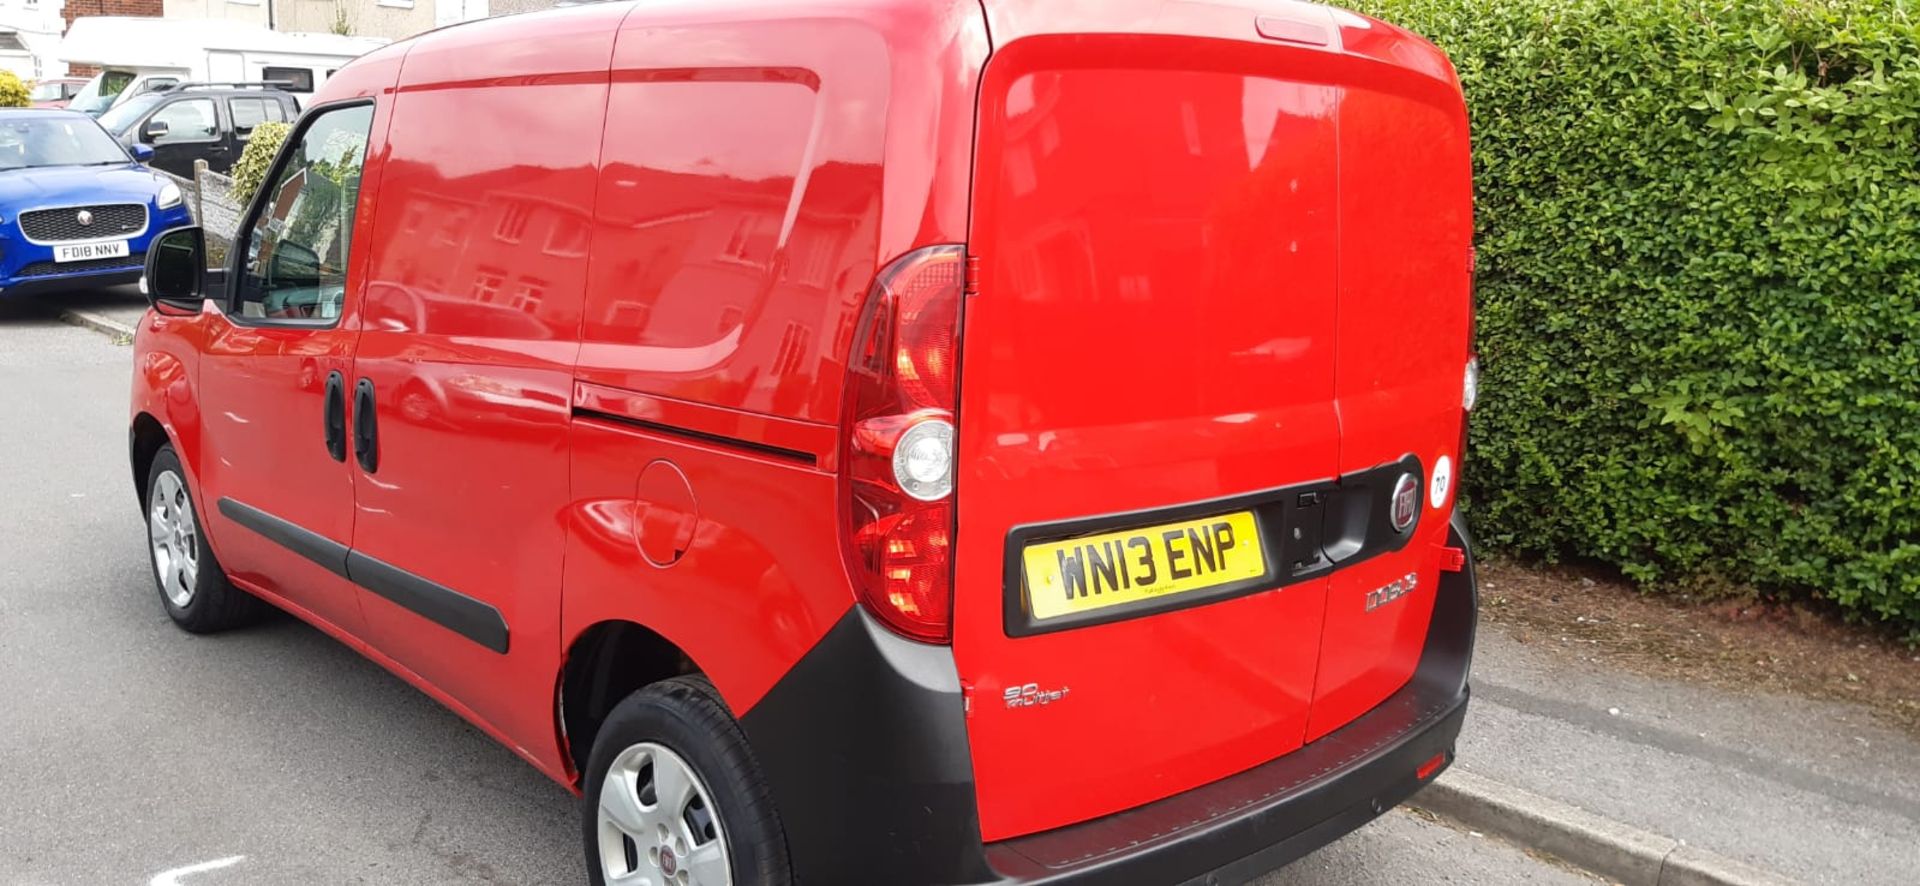 2013 FIAT DOBLO ....51K MILES WARRANTED FROM POST OFFICE - Image 7 of 11